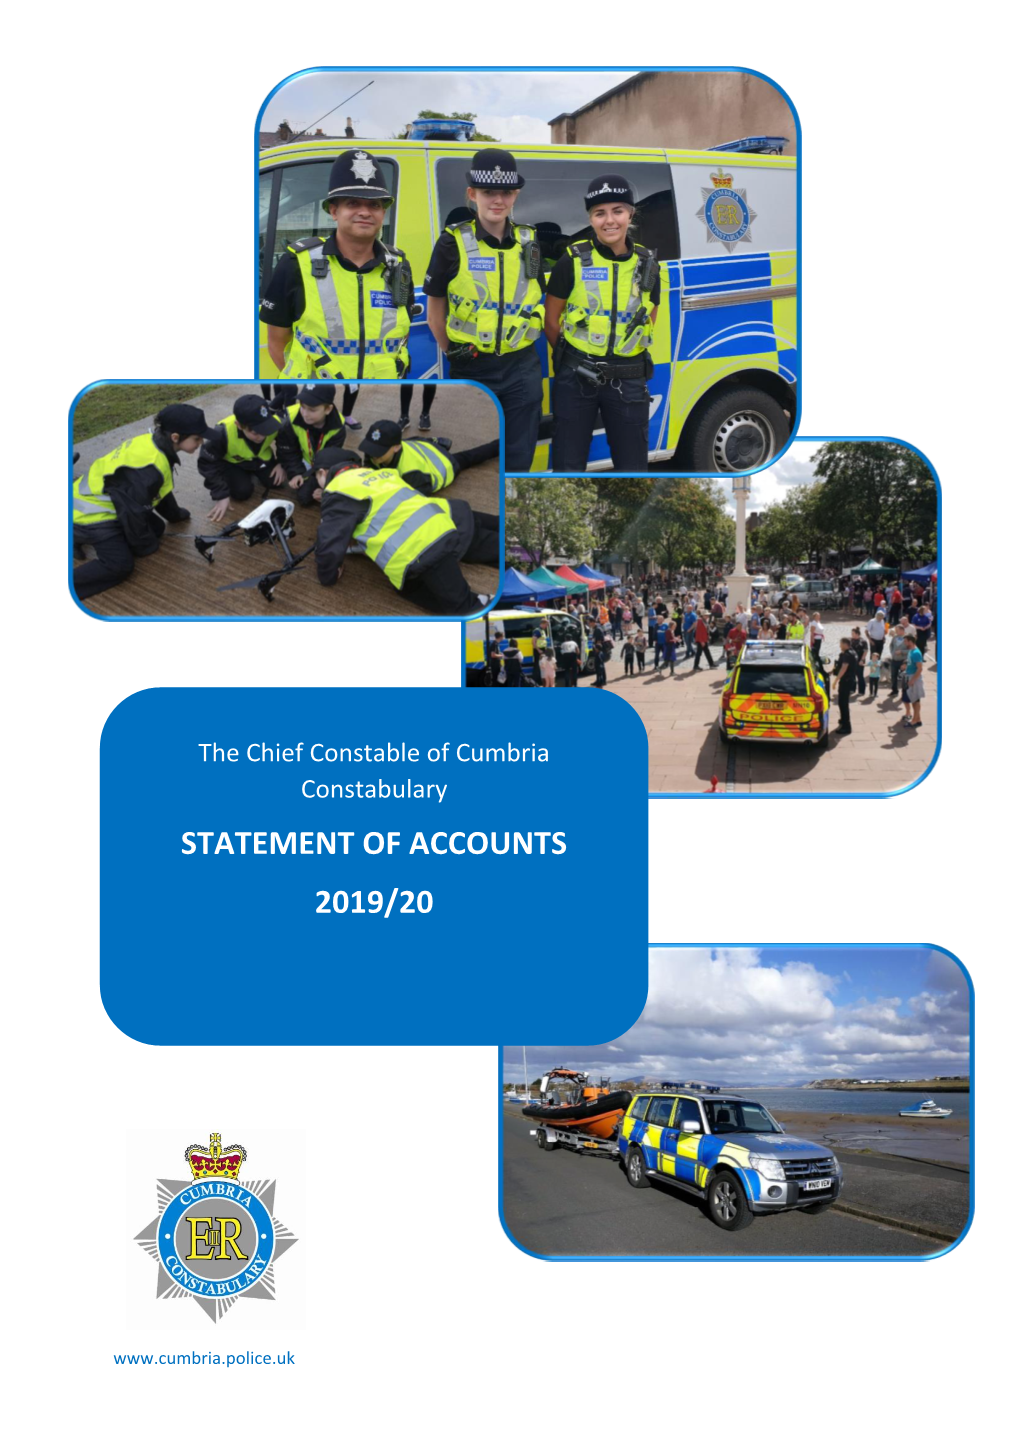 Chief Constable for Cumbria Statement of Accounts 2019/20